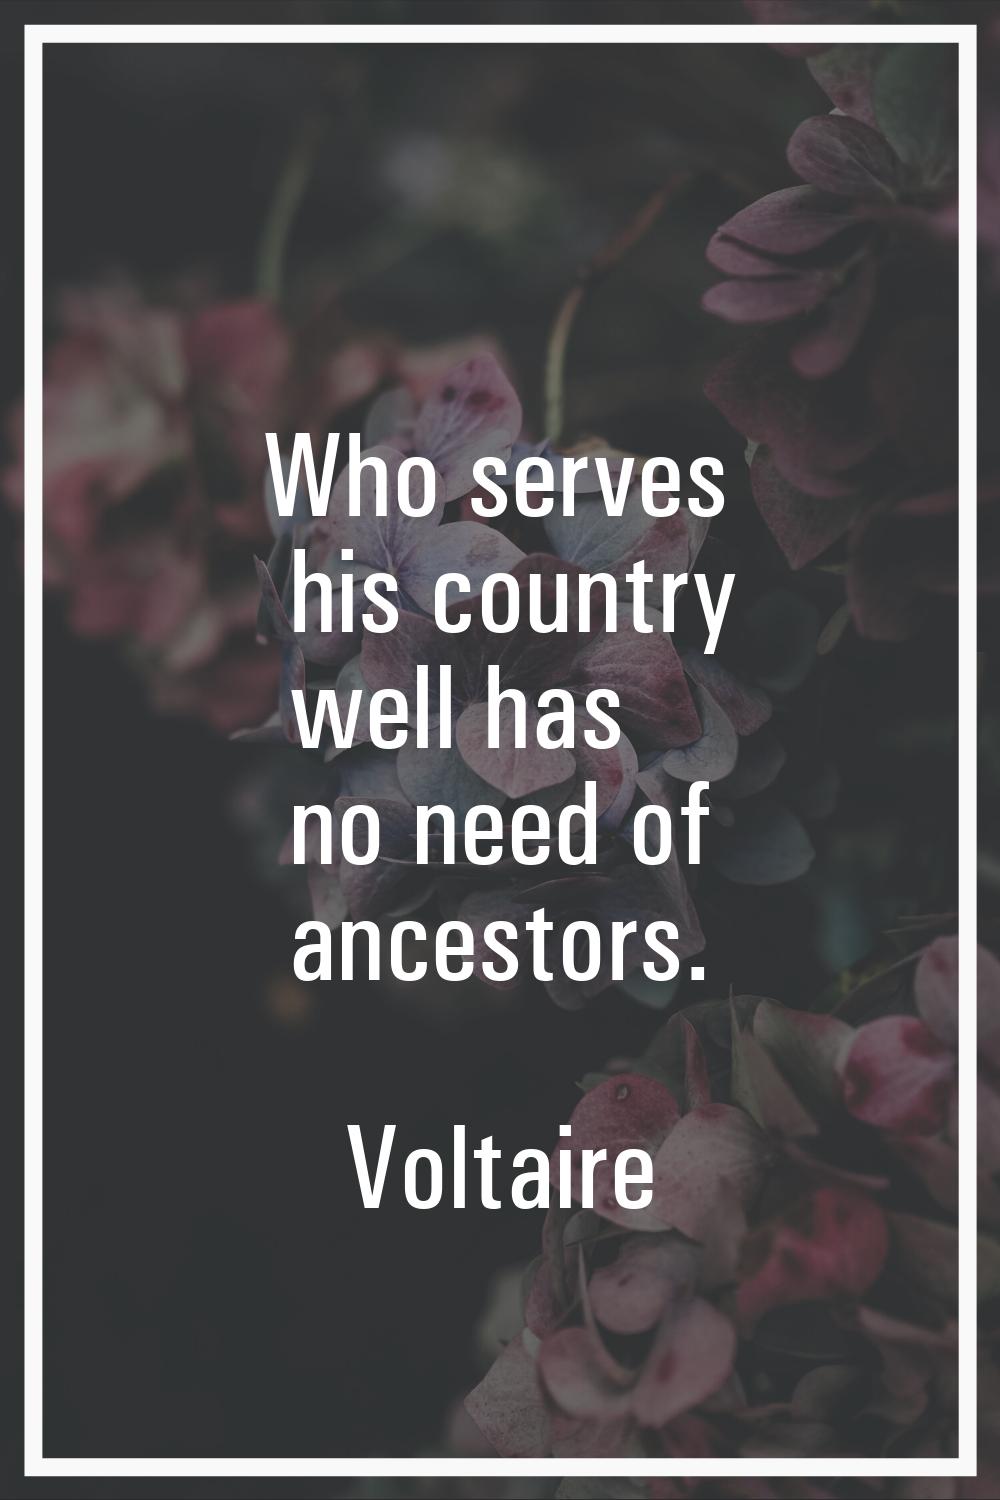 Who serves his country well has no need of ancestors.